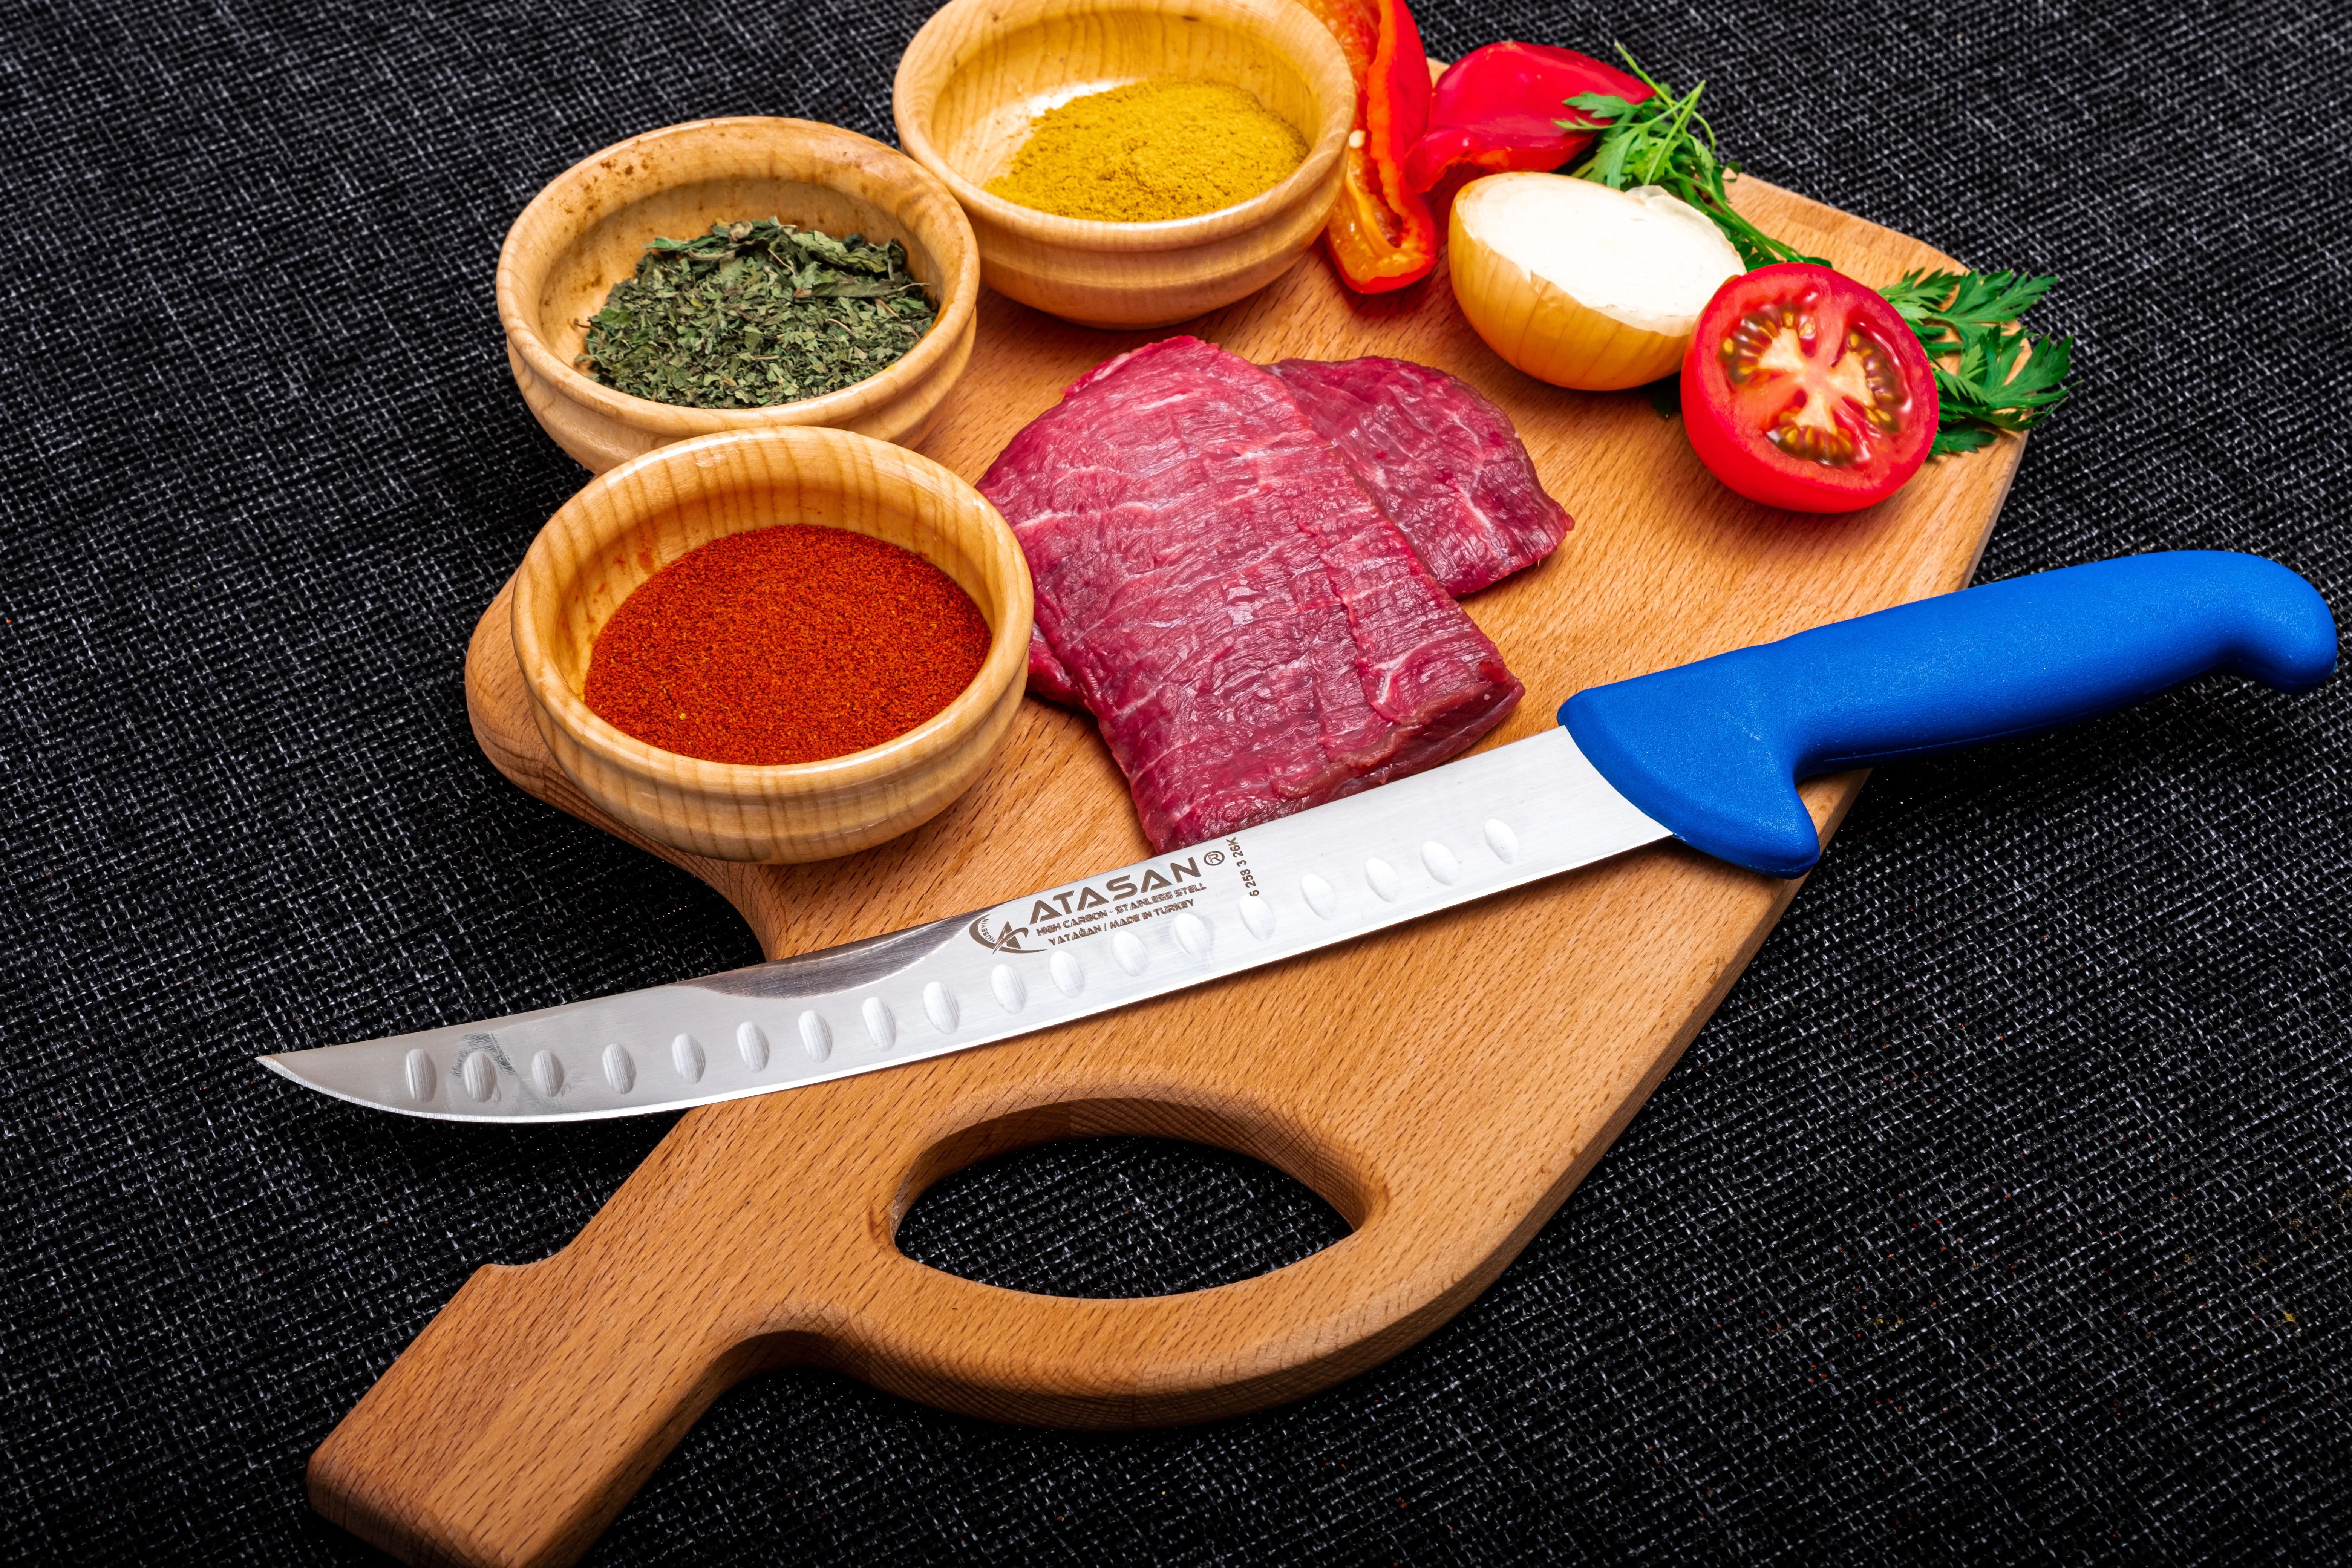 

Atasan Corrugated Saltbae Nusret Steak Knife Chef Kitchen Knives Handmade High Quality Professional Stainless Steel Meat Cutter